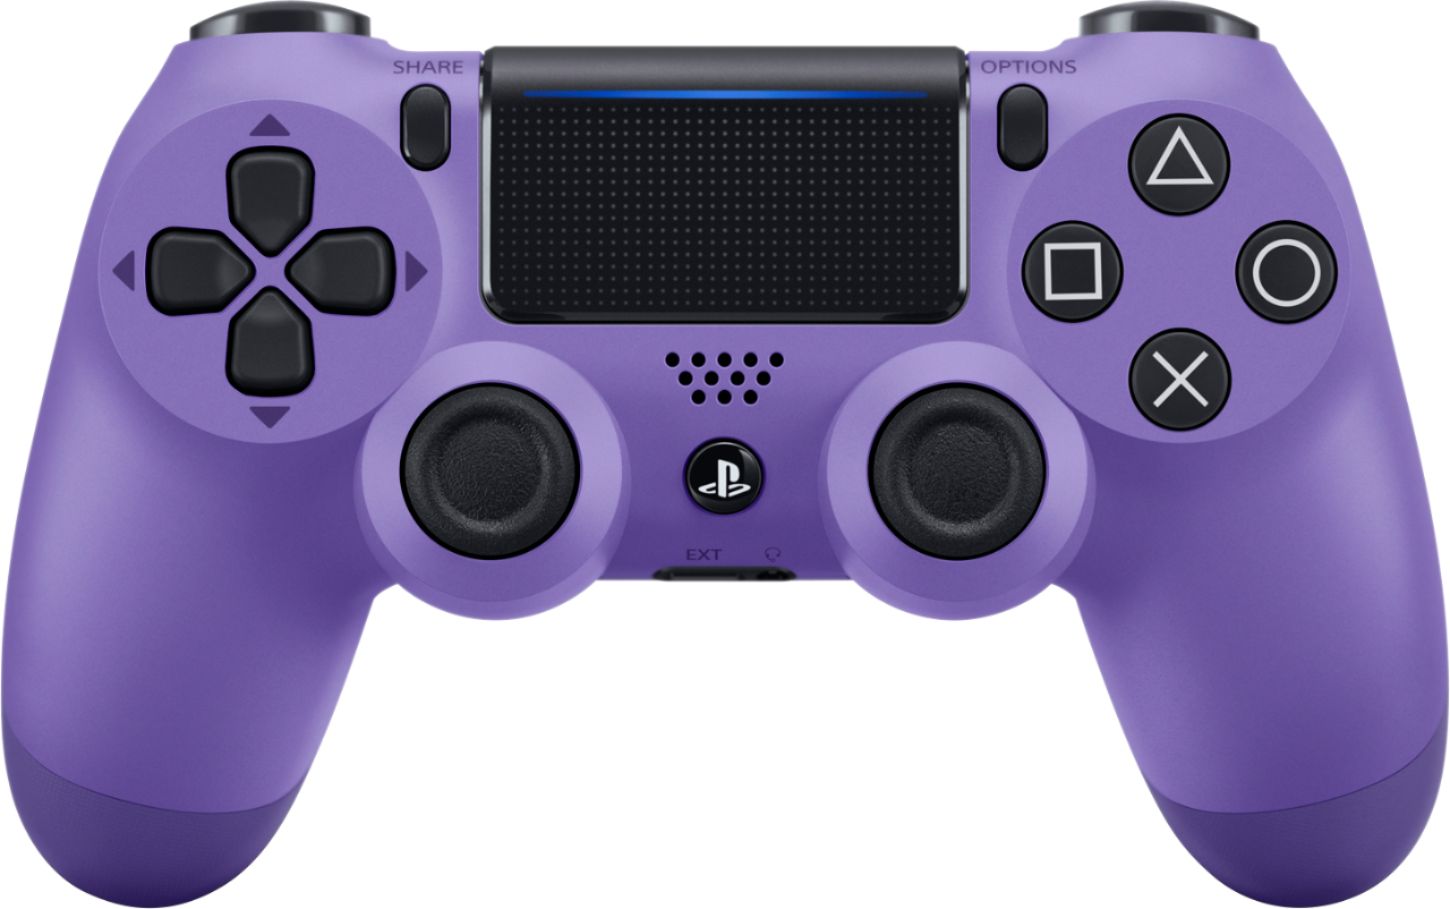 where can i buy a playstation 4 controller